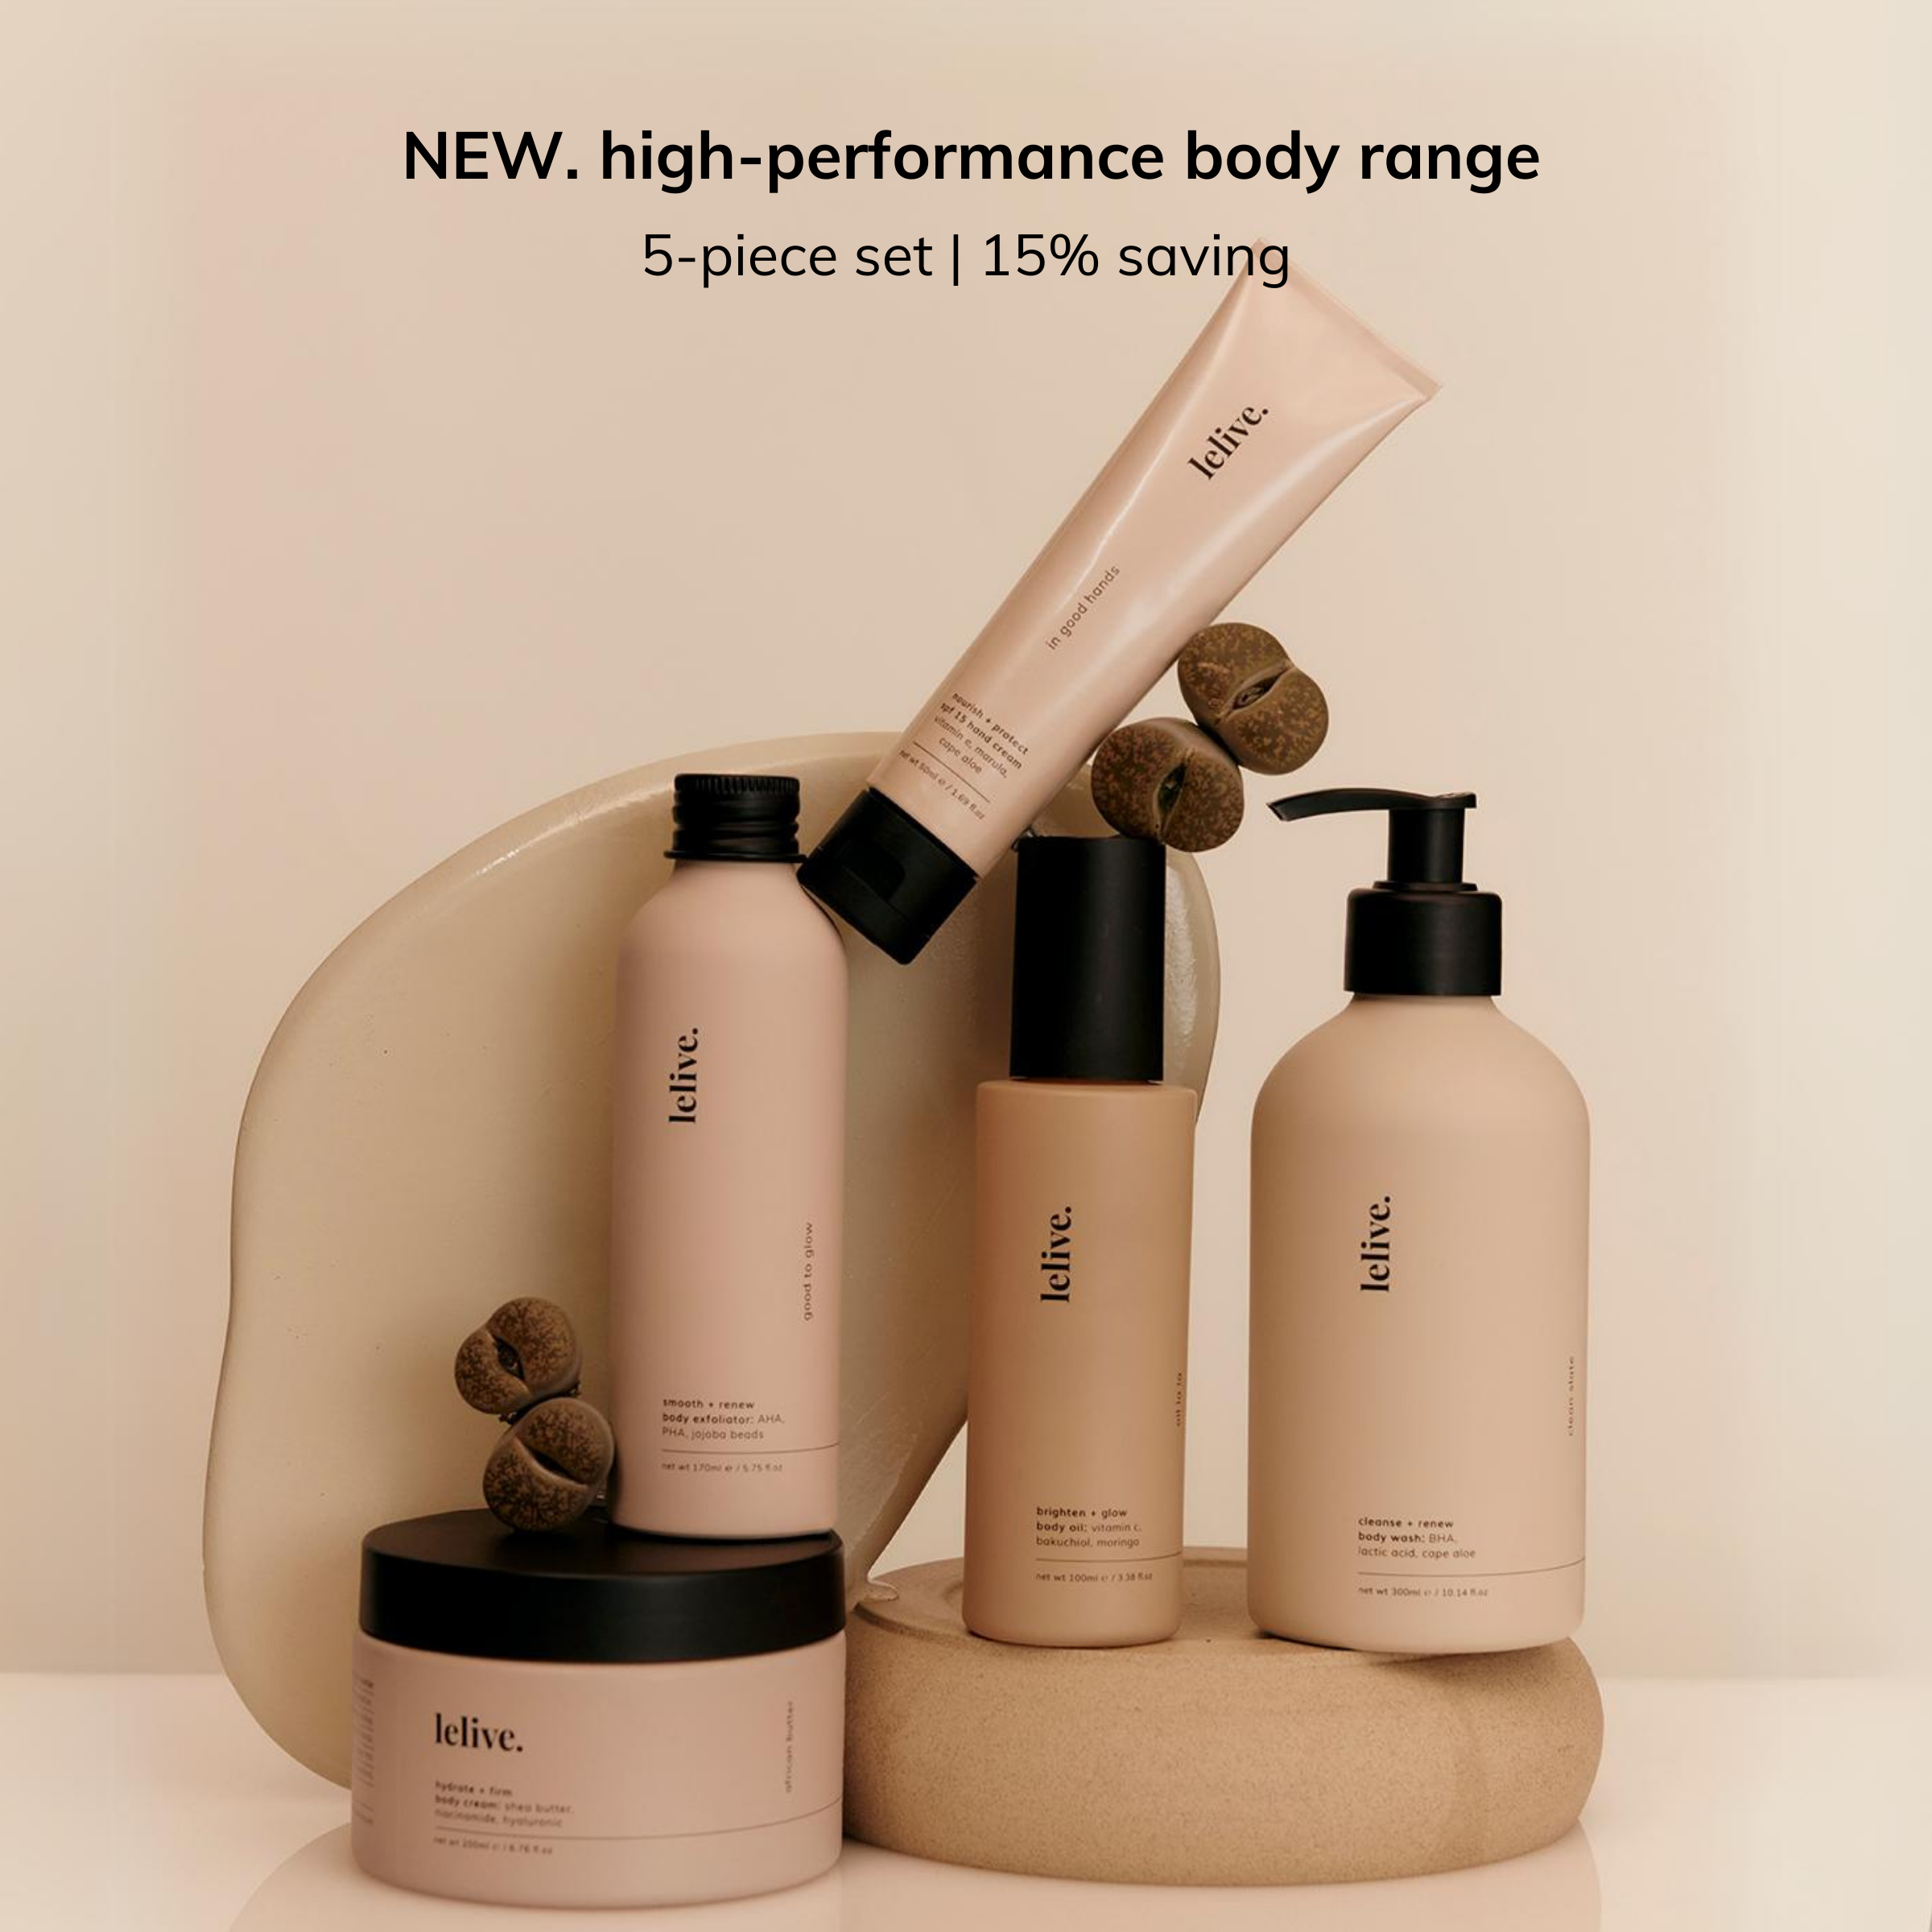 5-piece set | own the lelive body range